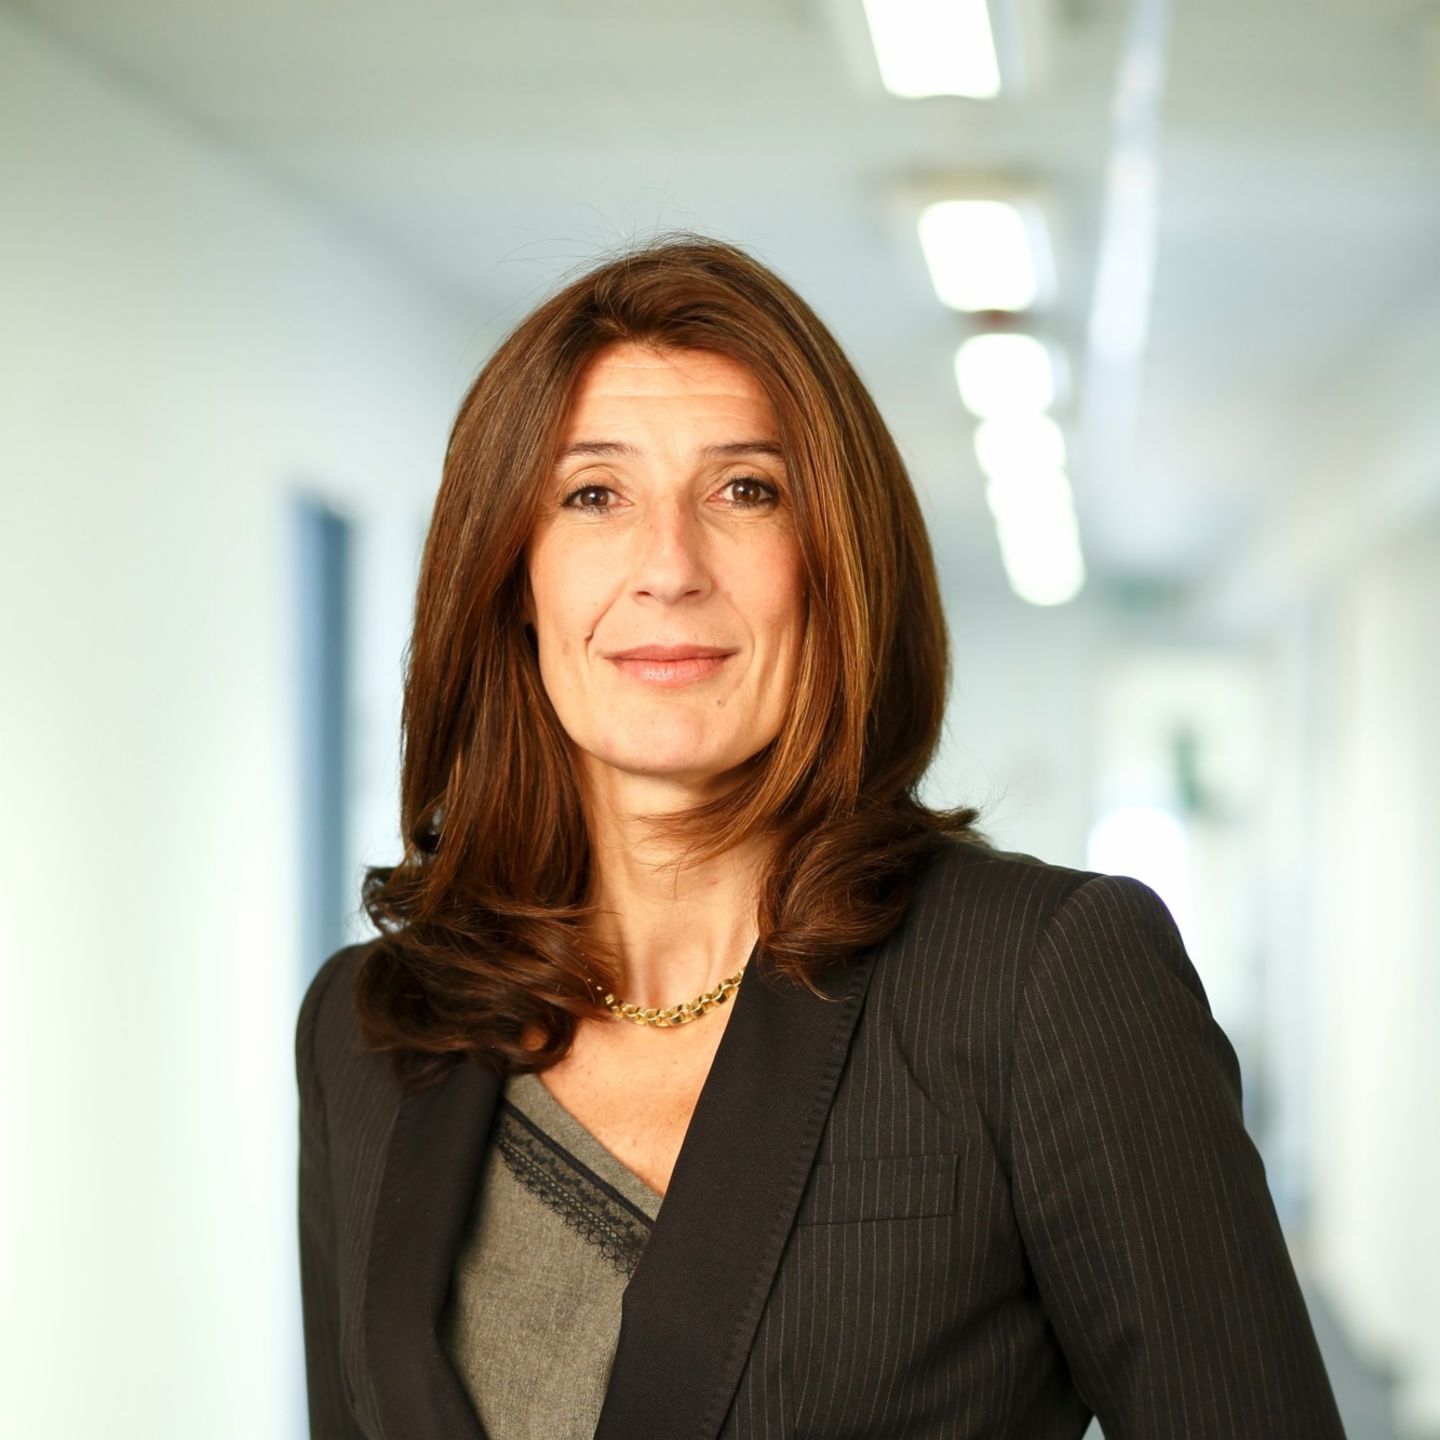 Annual Report 2019/20: Nathalie Lameyre, Managing Director of EOS in France